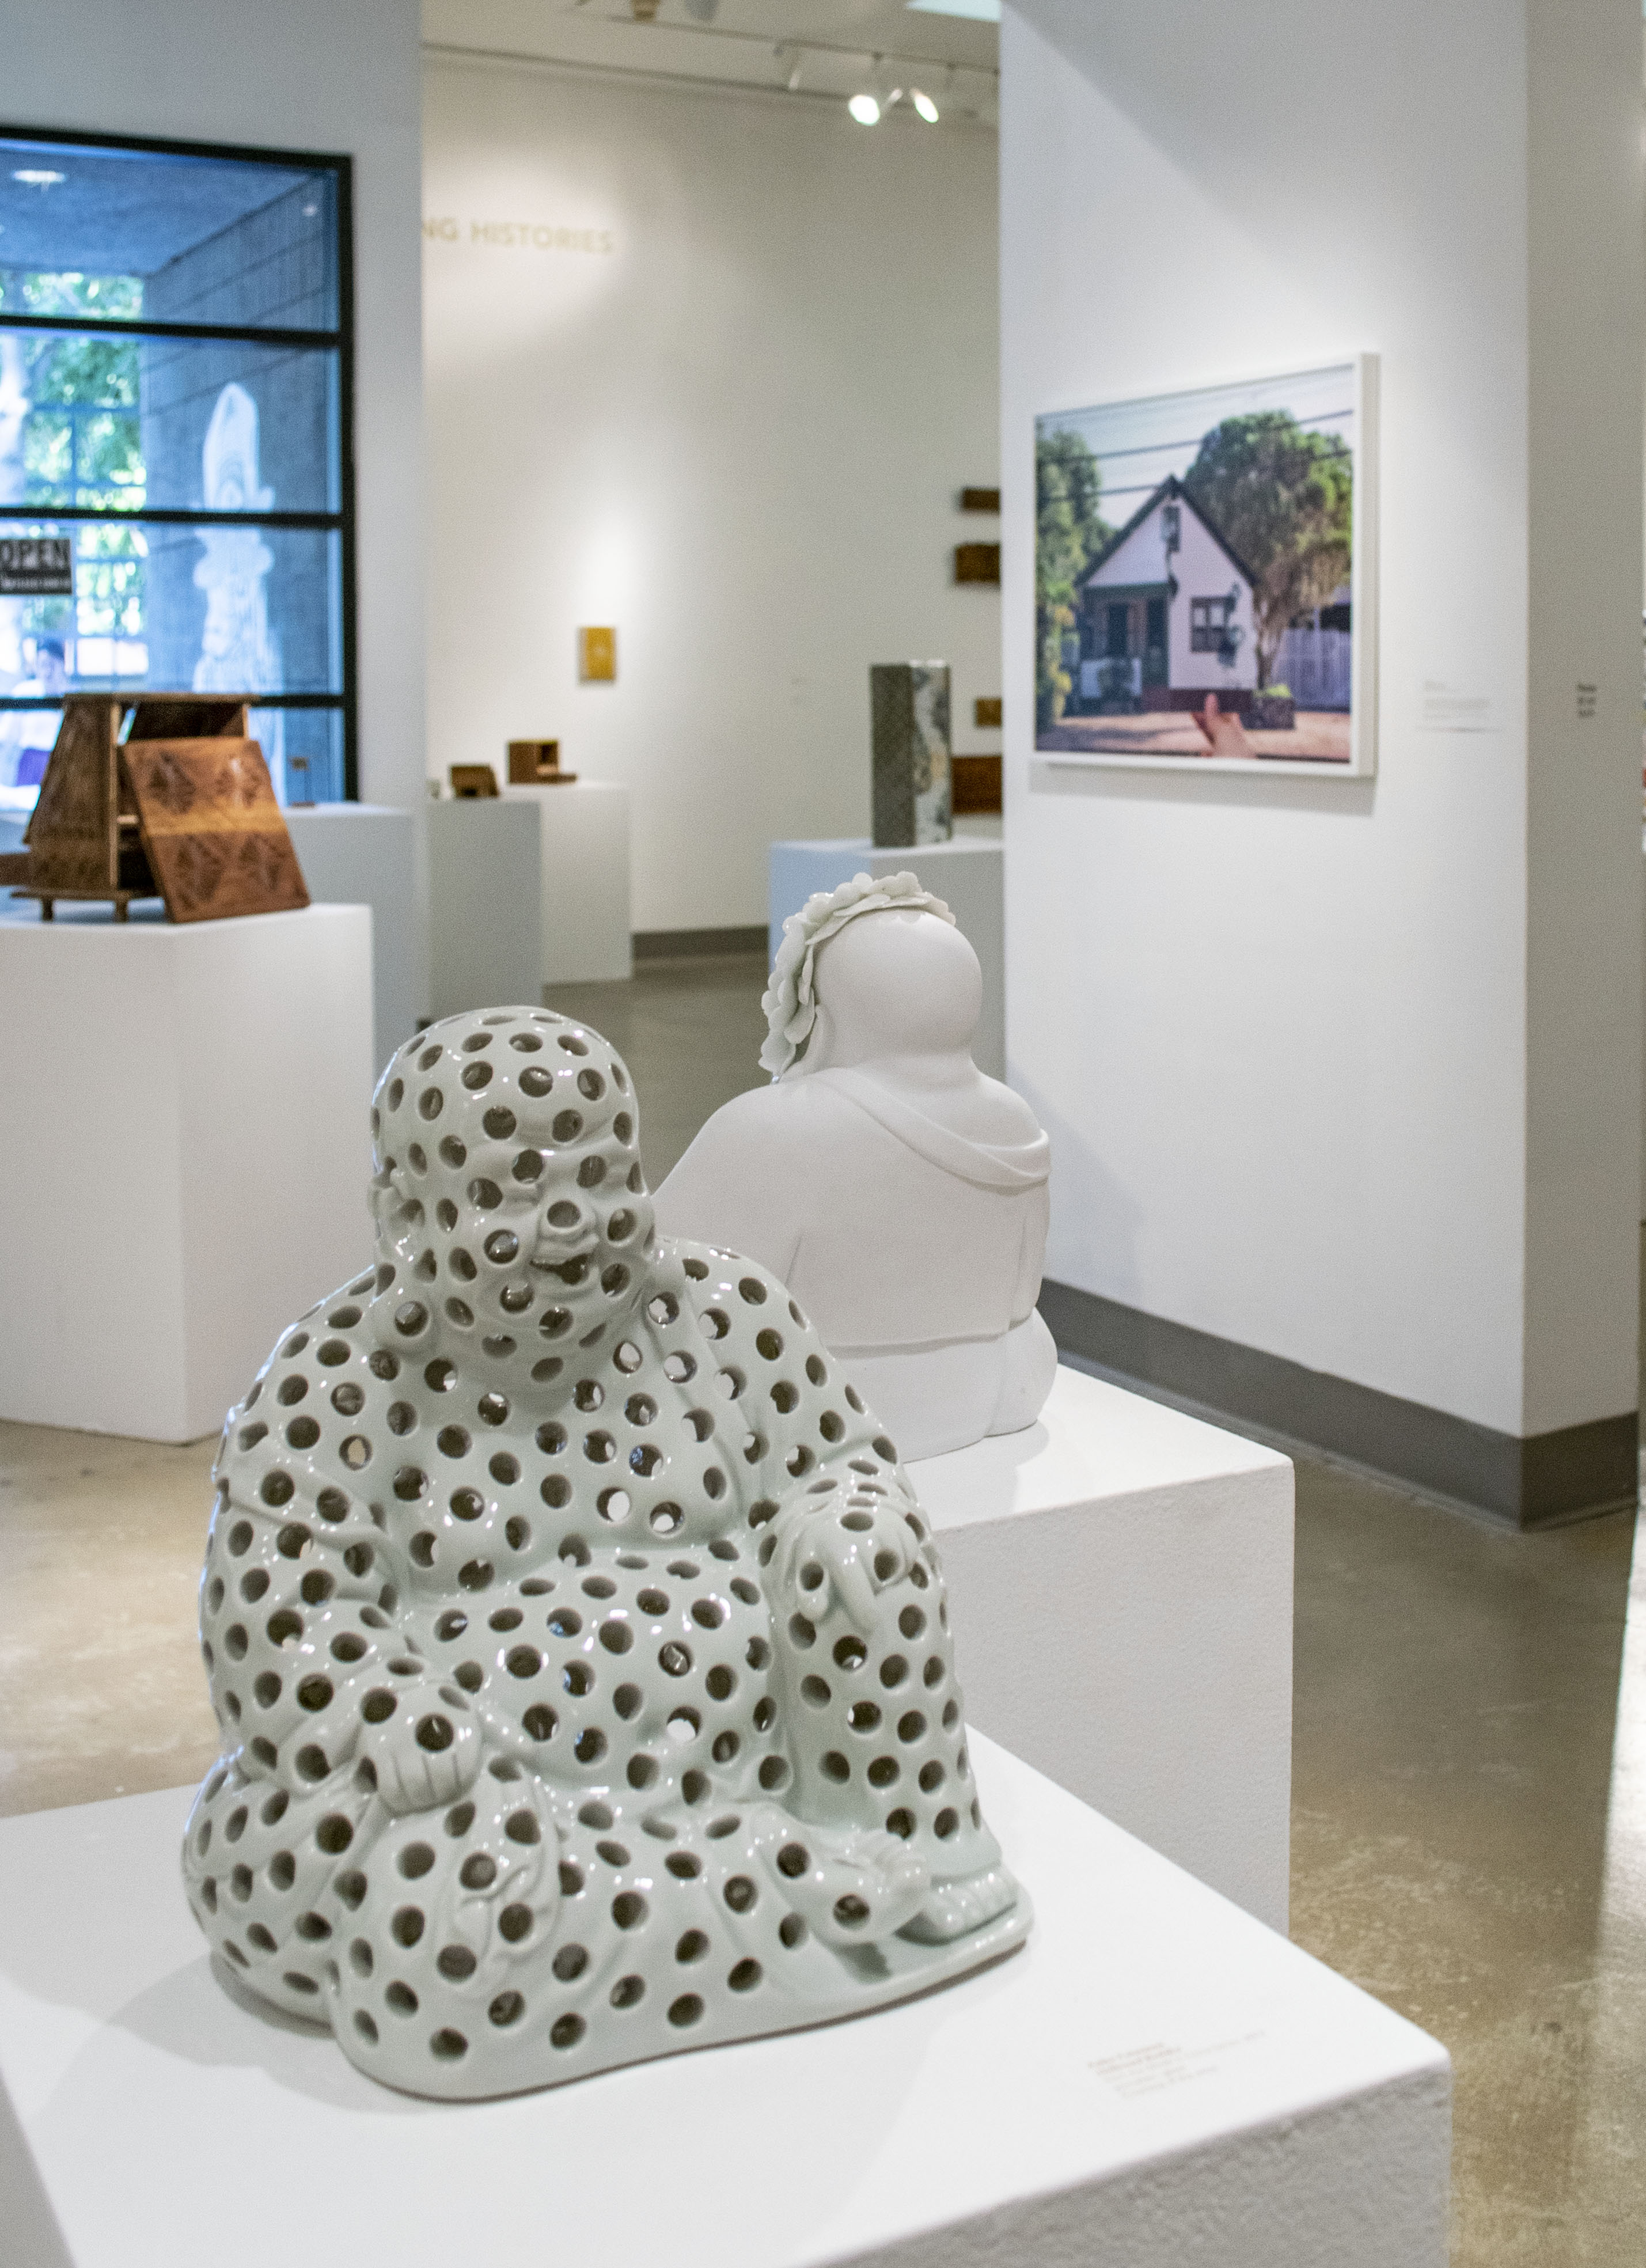 Hallway view of the front gallery, Exhibition: Somewhere In Between, Nov 6, 2018 - Mar 17, 2019, Co-curated by Michele Cairella Fillmore & Bia Gayotto, W. Keith & Janet Kellogg Art Gallery, Cal Poly Pomona.